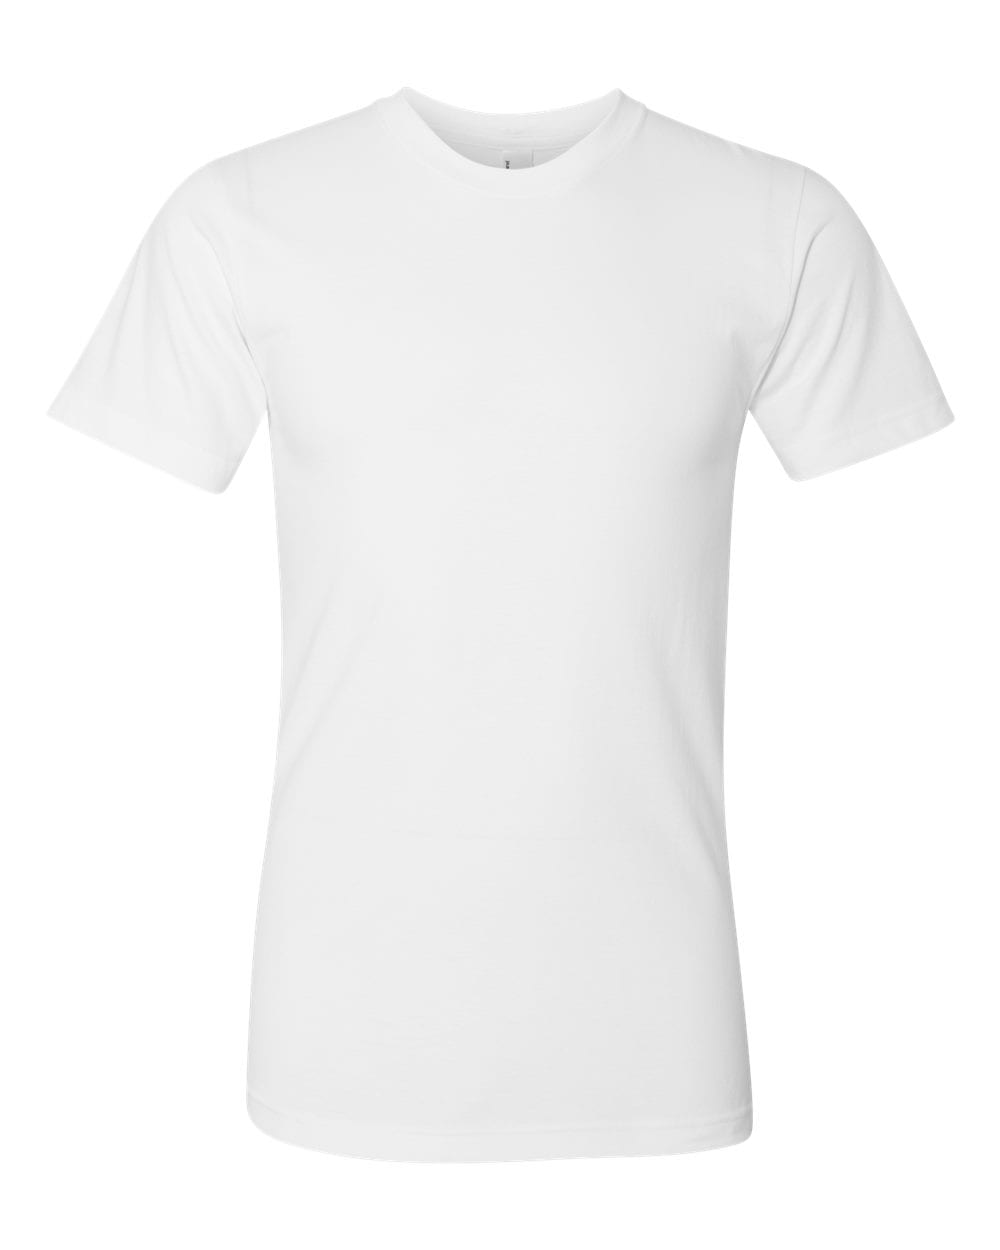 The Top 7 White T-Shirt for - & Design